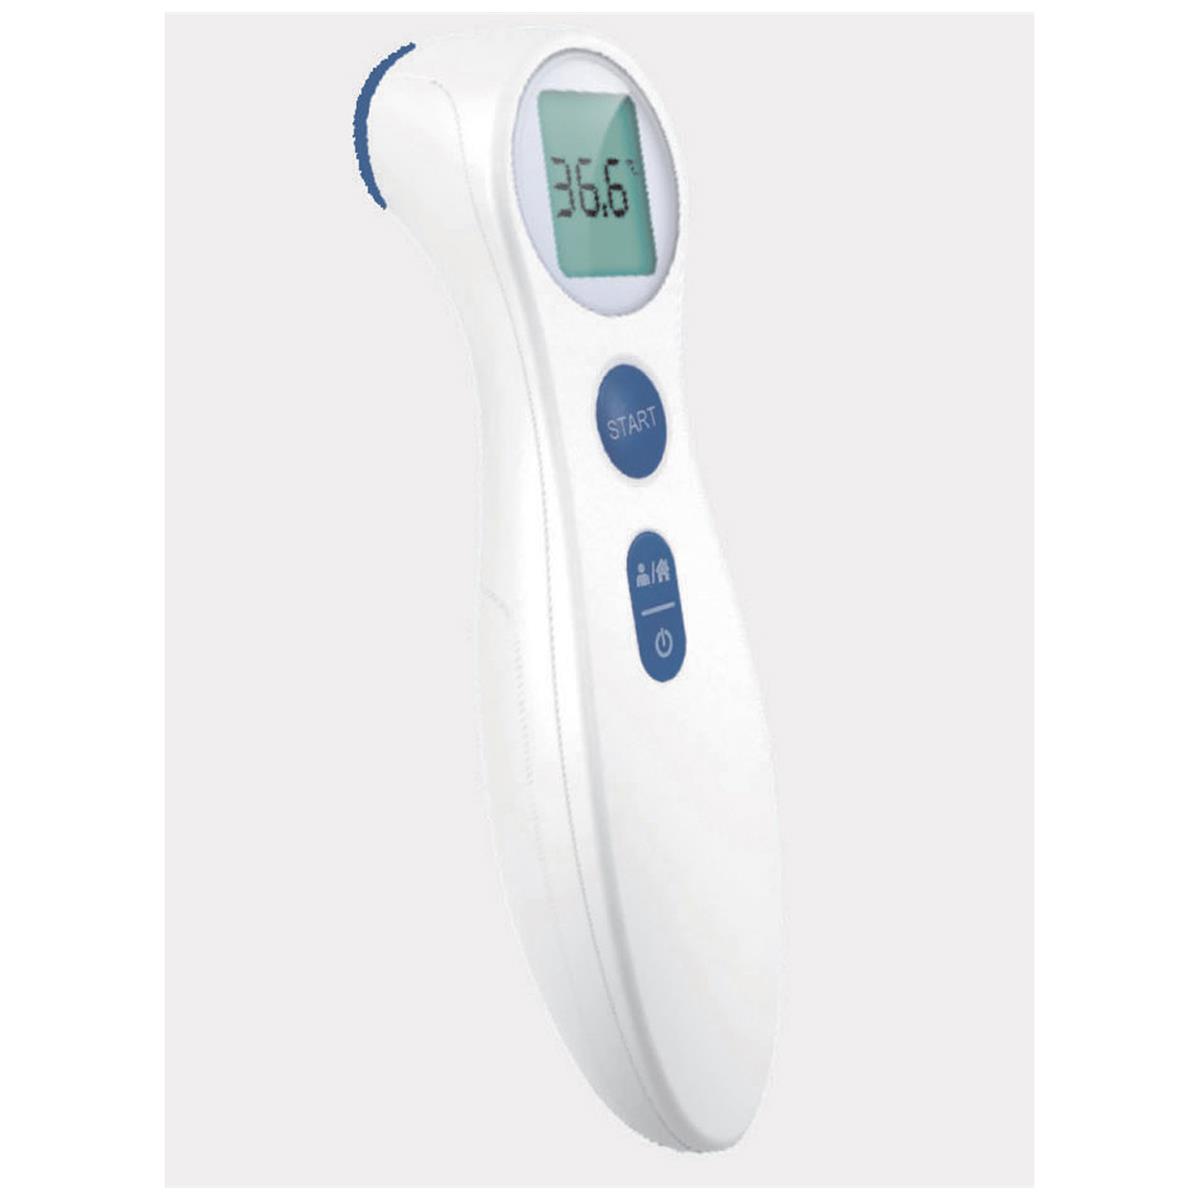 Image of Veridian Health Care Non-Contact Forehead Thermometer